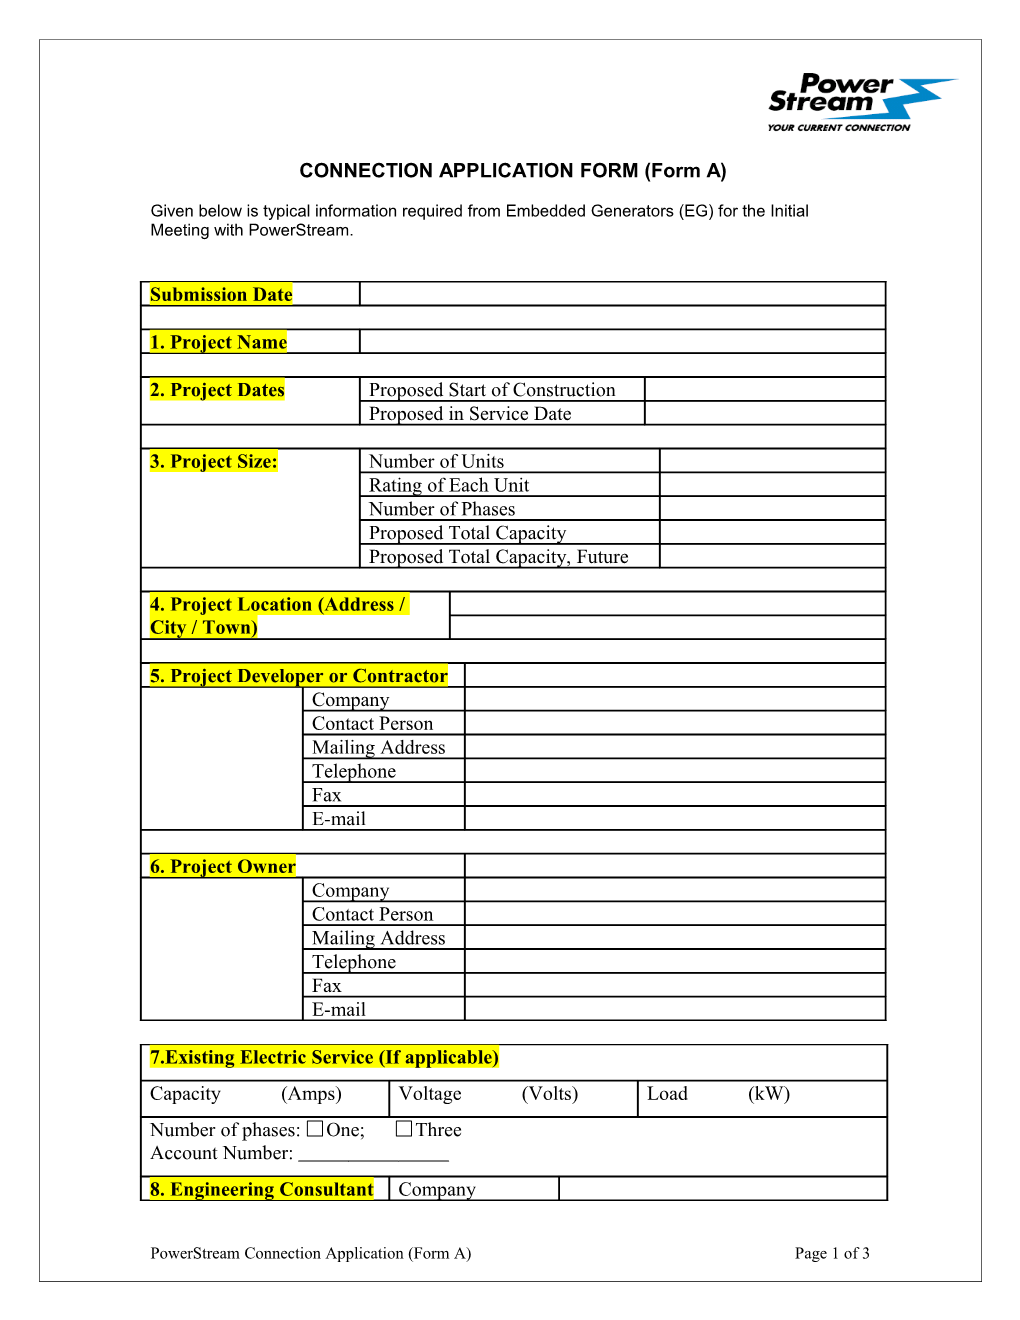 CONNECTION APPLICATION FORM (Form A)